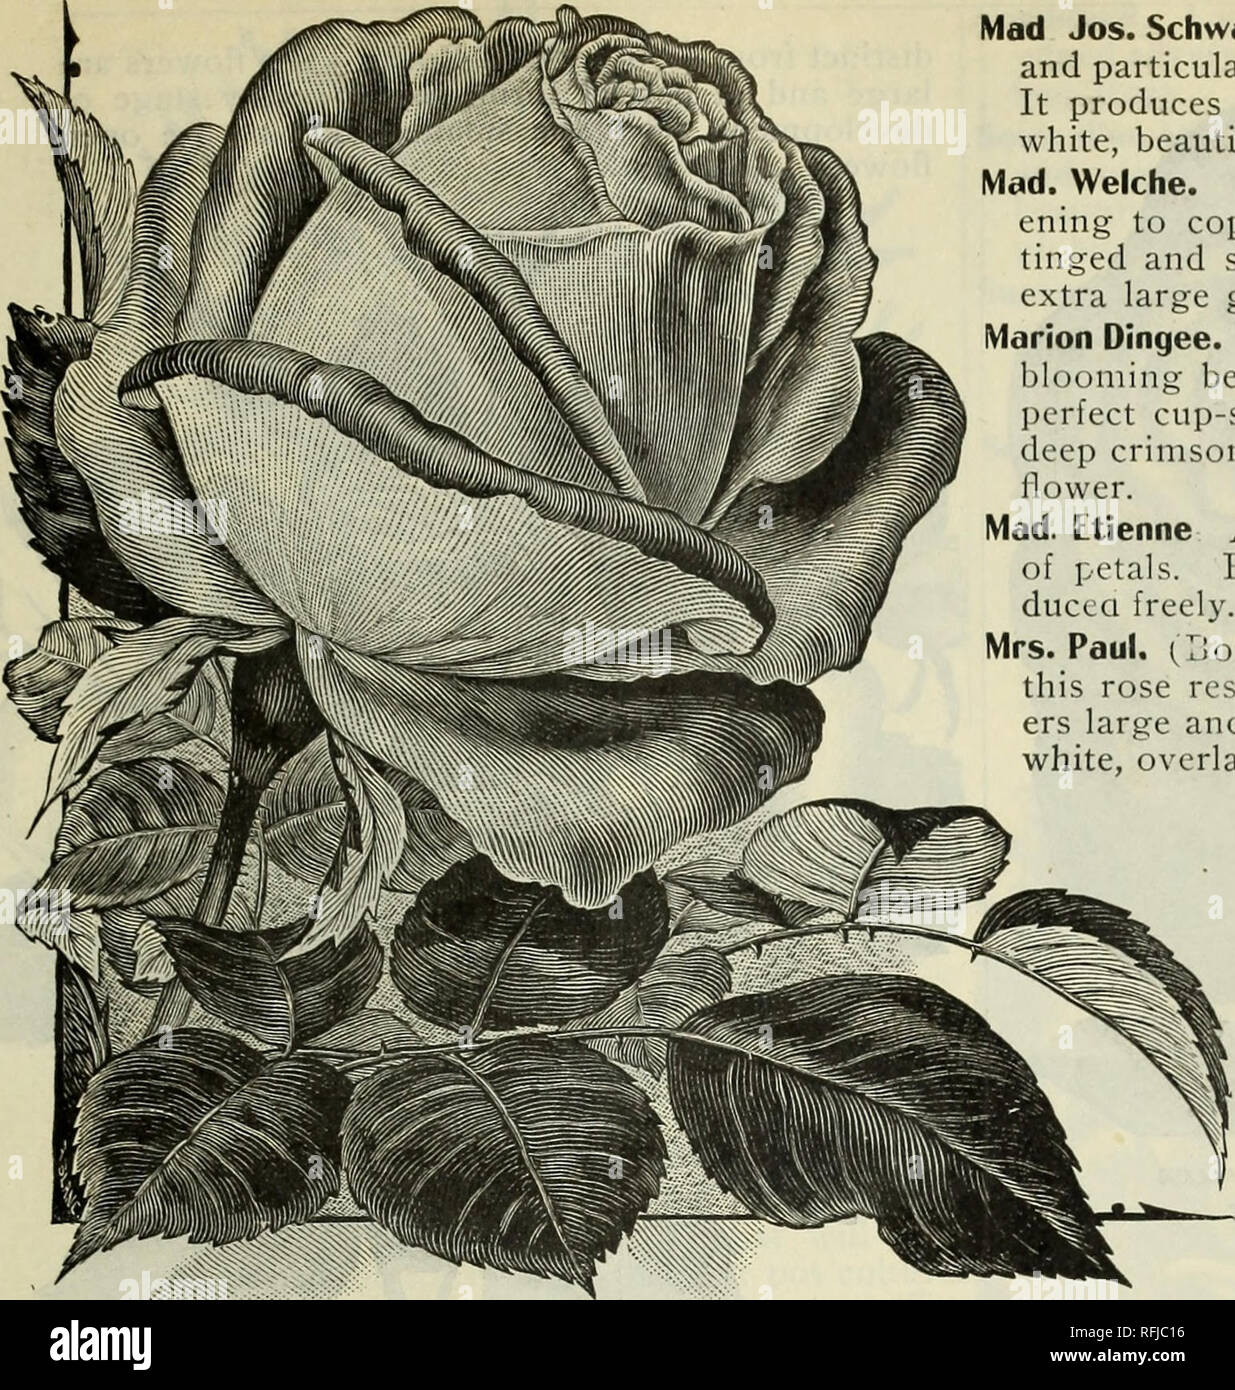 . Spring 1899. Nursery stock Ohio Catalogs; Vegetables Seeds Catalogs; Flowers Catalogs; Bulbs (Plants) Catalogs; Plants, Ornamental Catalogs; Fruit trees Seedlings Catalogs; Fruit Catalogs. ROSES. 105. MAMAN COCHET. Mad Jos. Schwartz. One of the most hardy Tea Roses and particularly adapted for open-ground planting. It produces its bloom in great profusion; color, white, beautifully flushed with pink. Mad. Welche. Color beautiful amber yellow, deep- ening to coppery yellow at the center, delicaLely tinged and shaded with dark orange red; flowers extra large globular form, very double and full Stock Photo